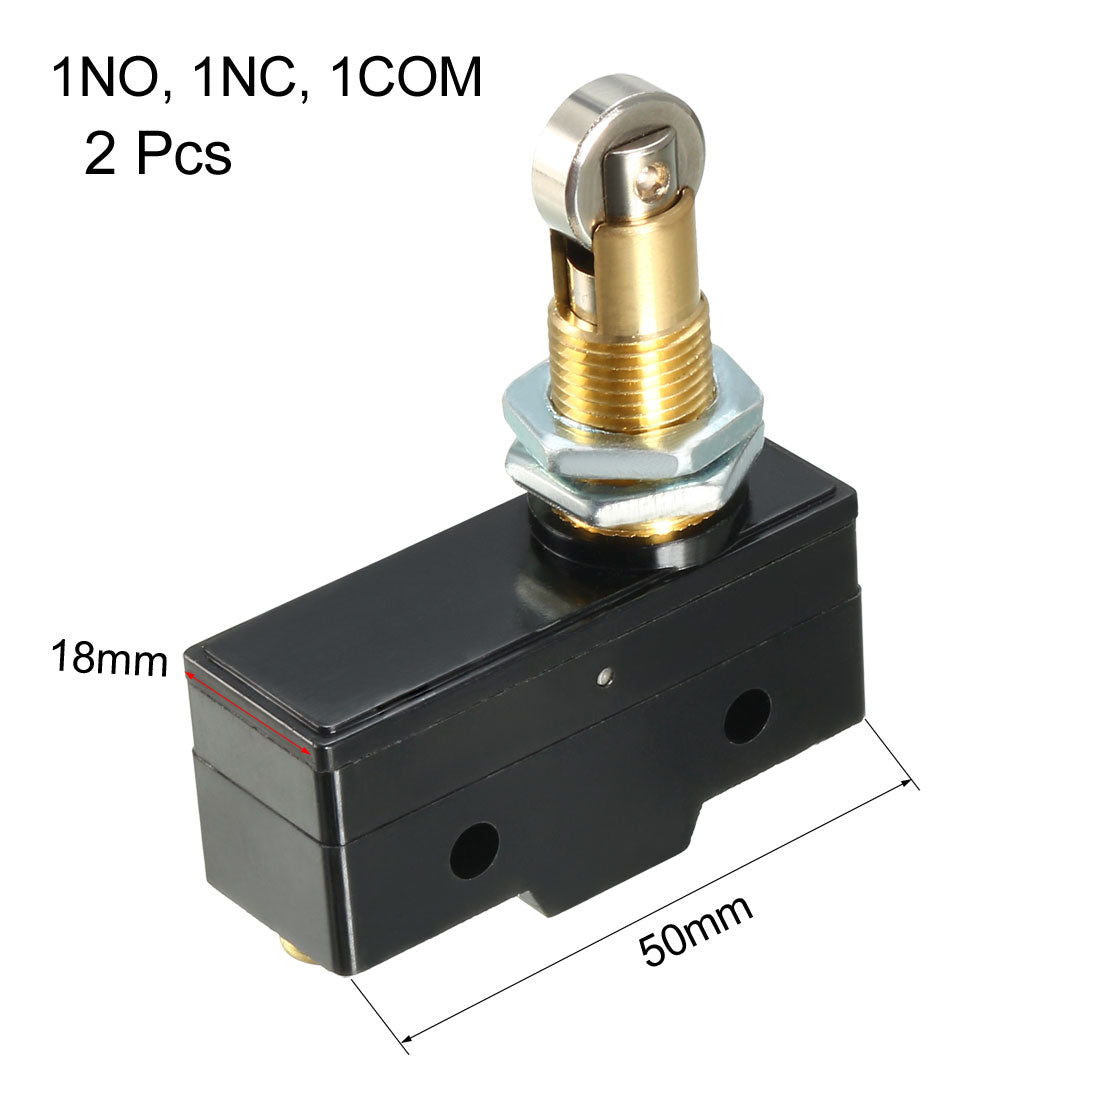 uxcell Uxcell 2PCS Z-15GQ22-B 1NO + 1NC Panel Mount Roller Plunger Micro Action Switches